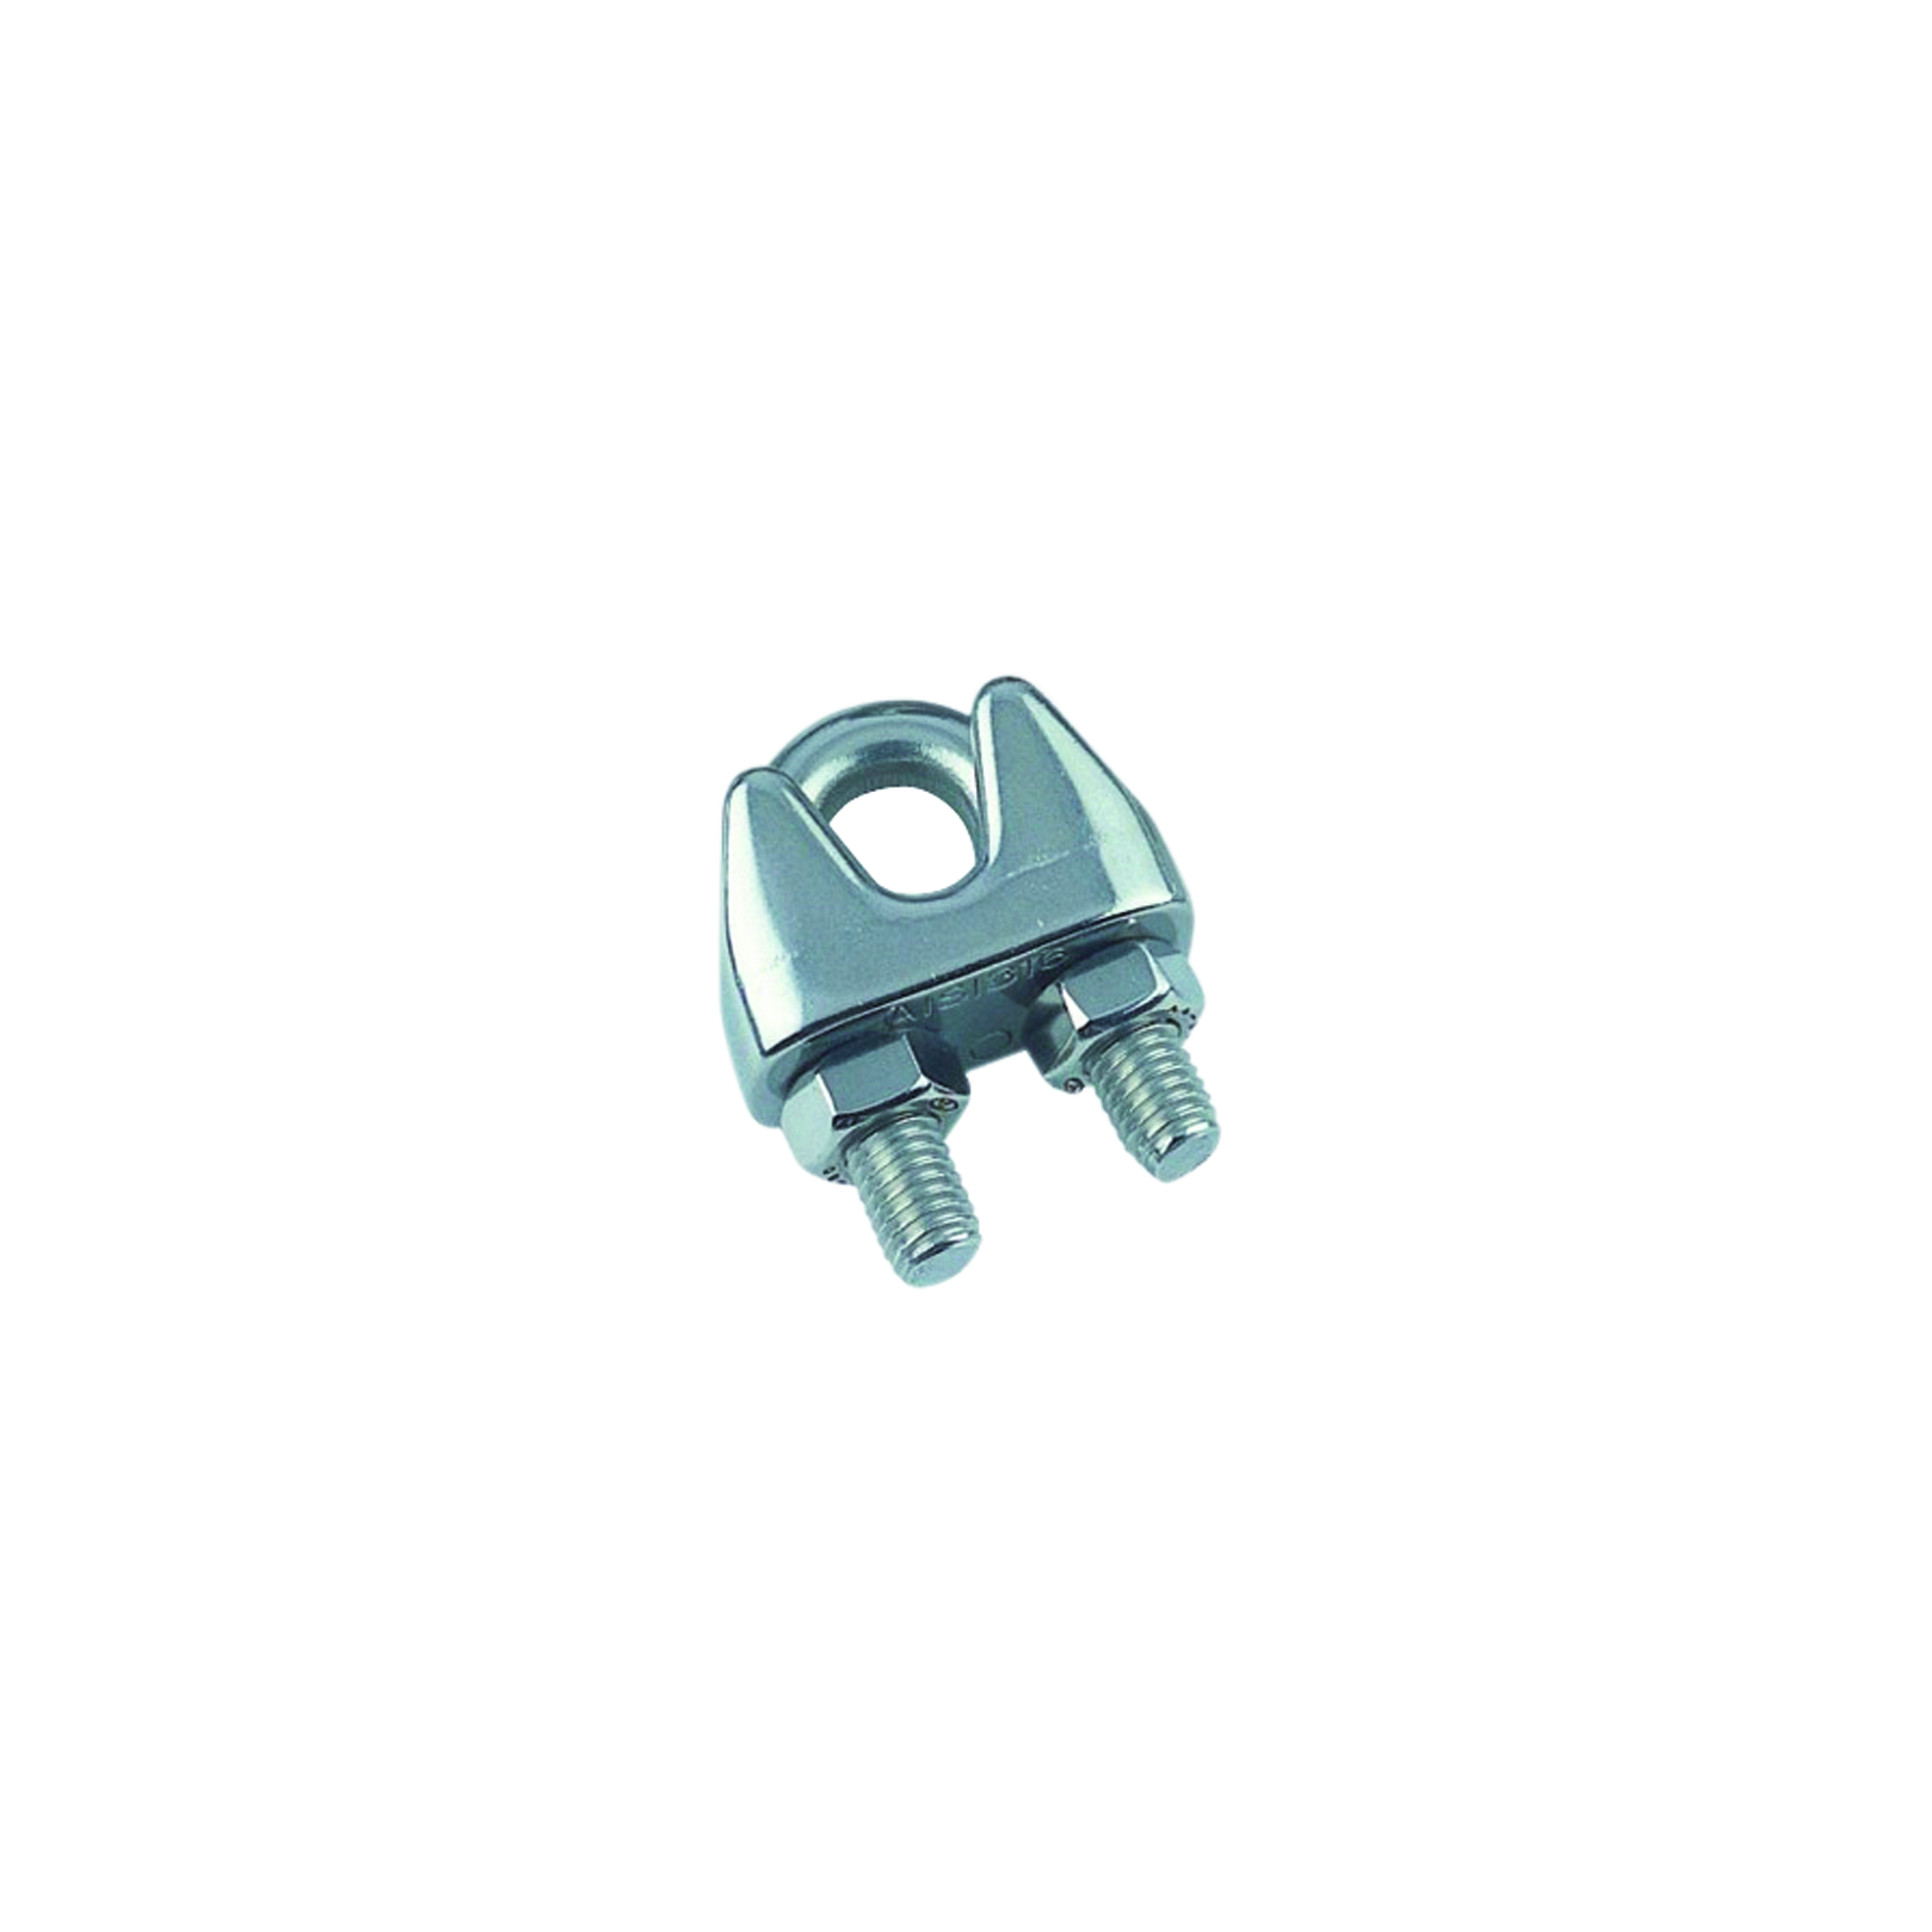 20 STCK / PCS. Wire rope clip A4  6mm